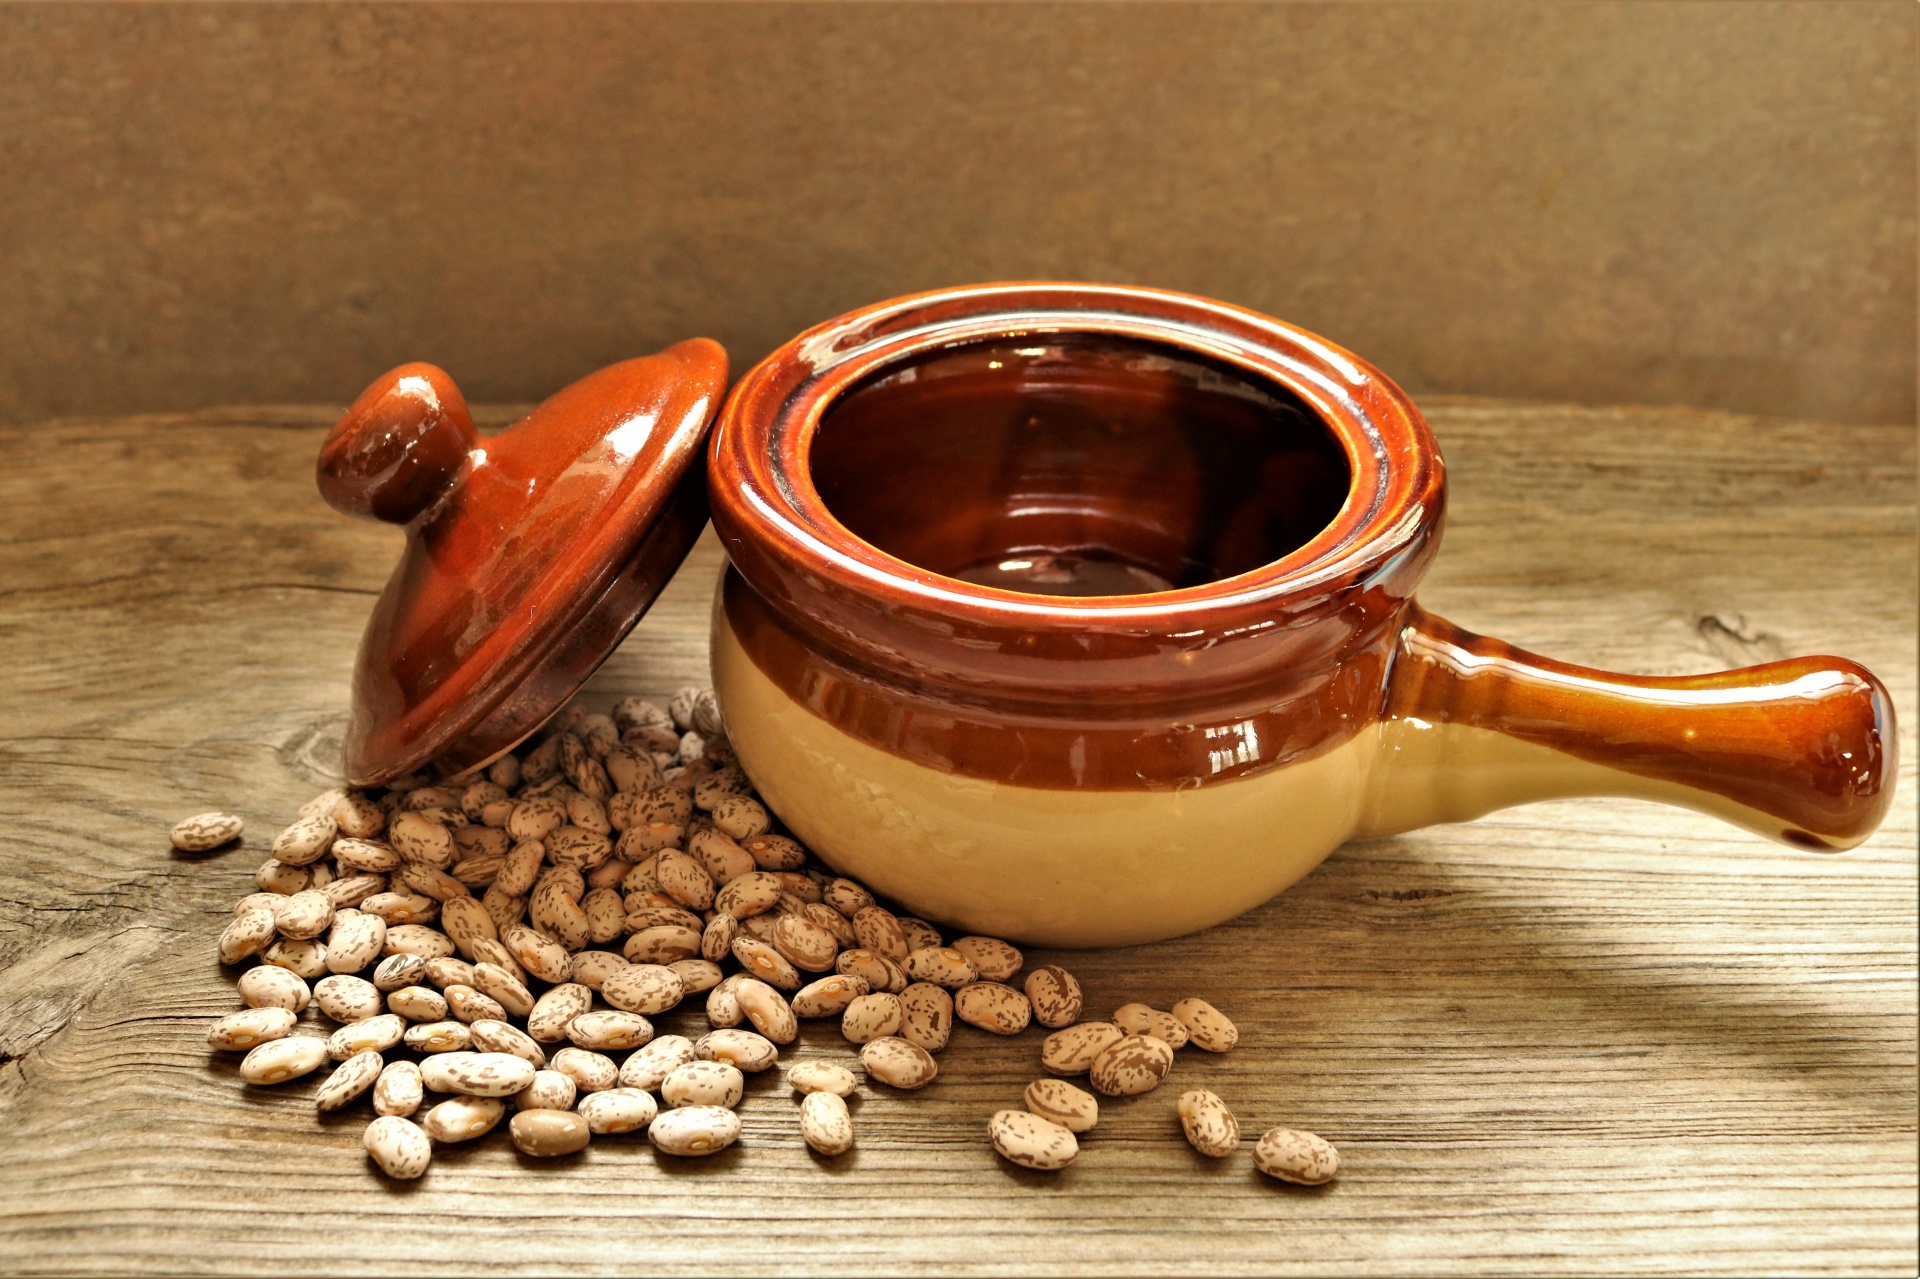 Pinto Beans And Bean Pot On Table